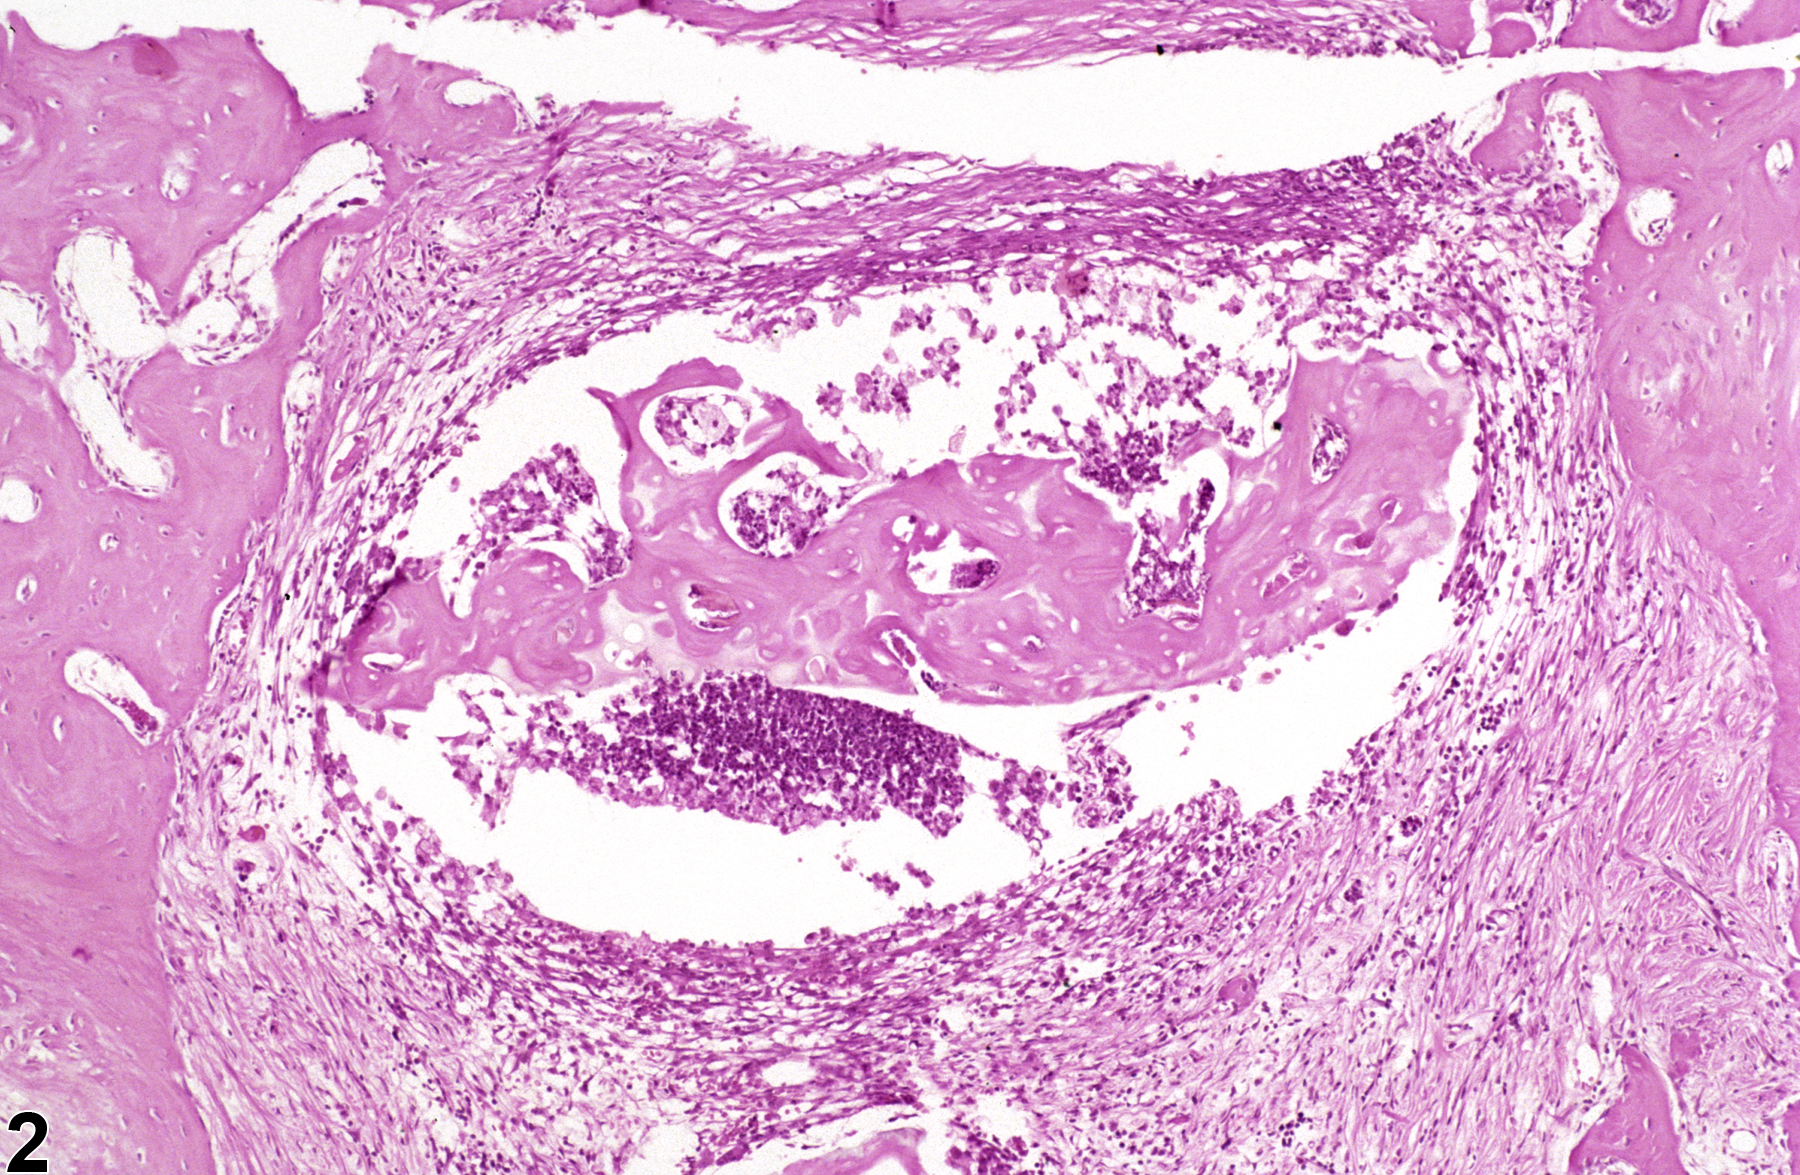 Image of inflammation in the bone from a male B6C3F1/N mouse in a chronic study